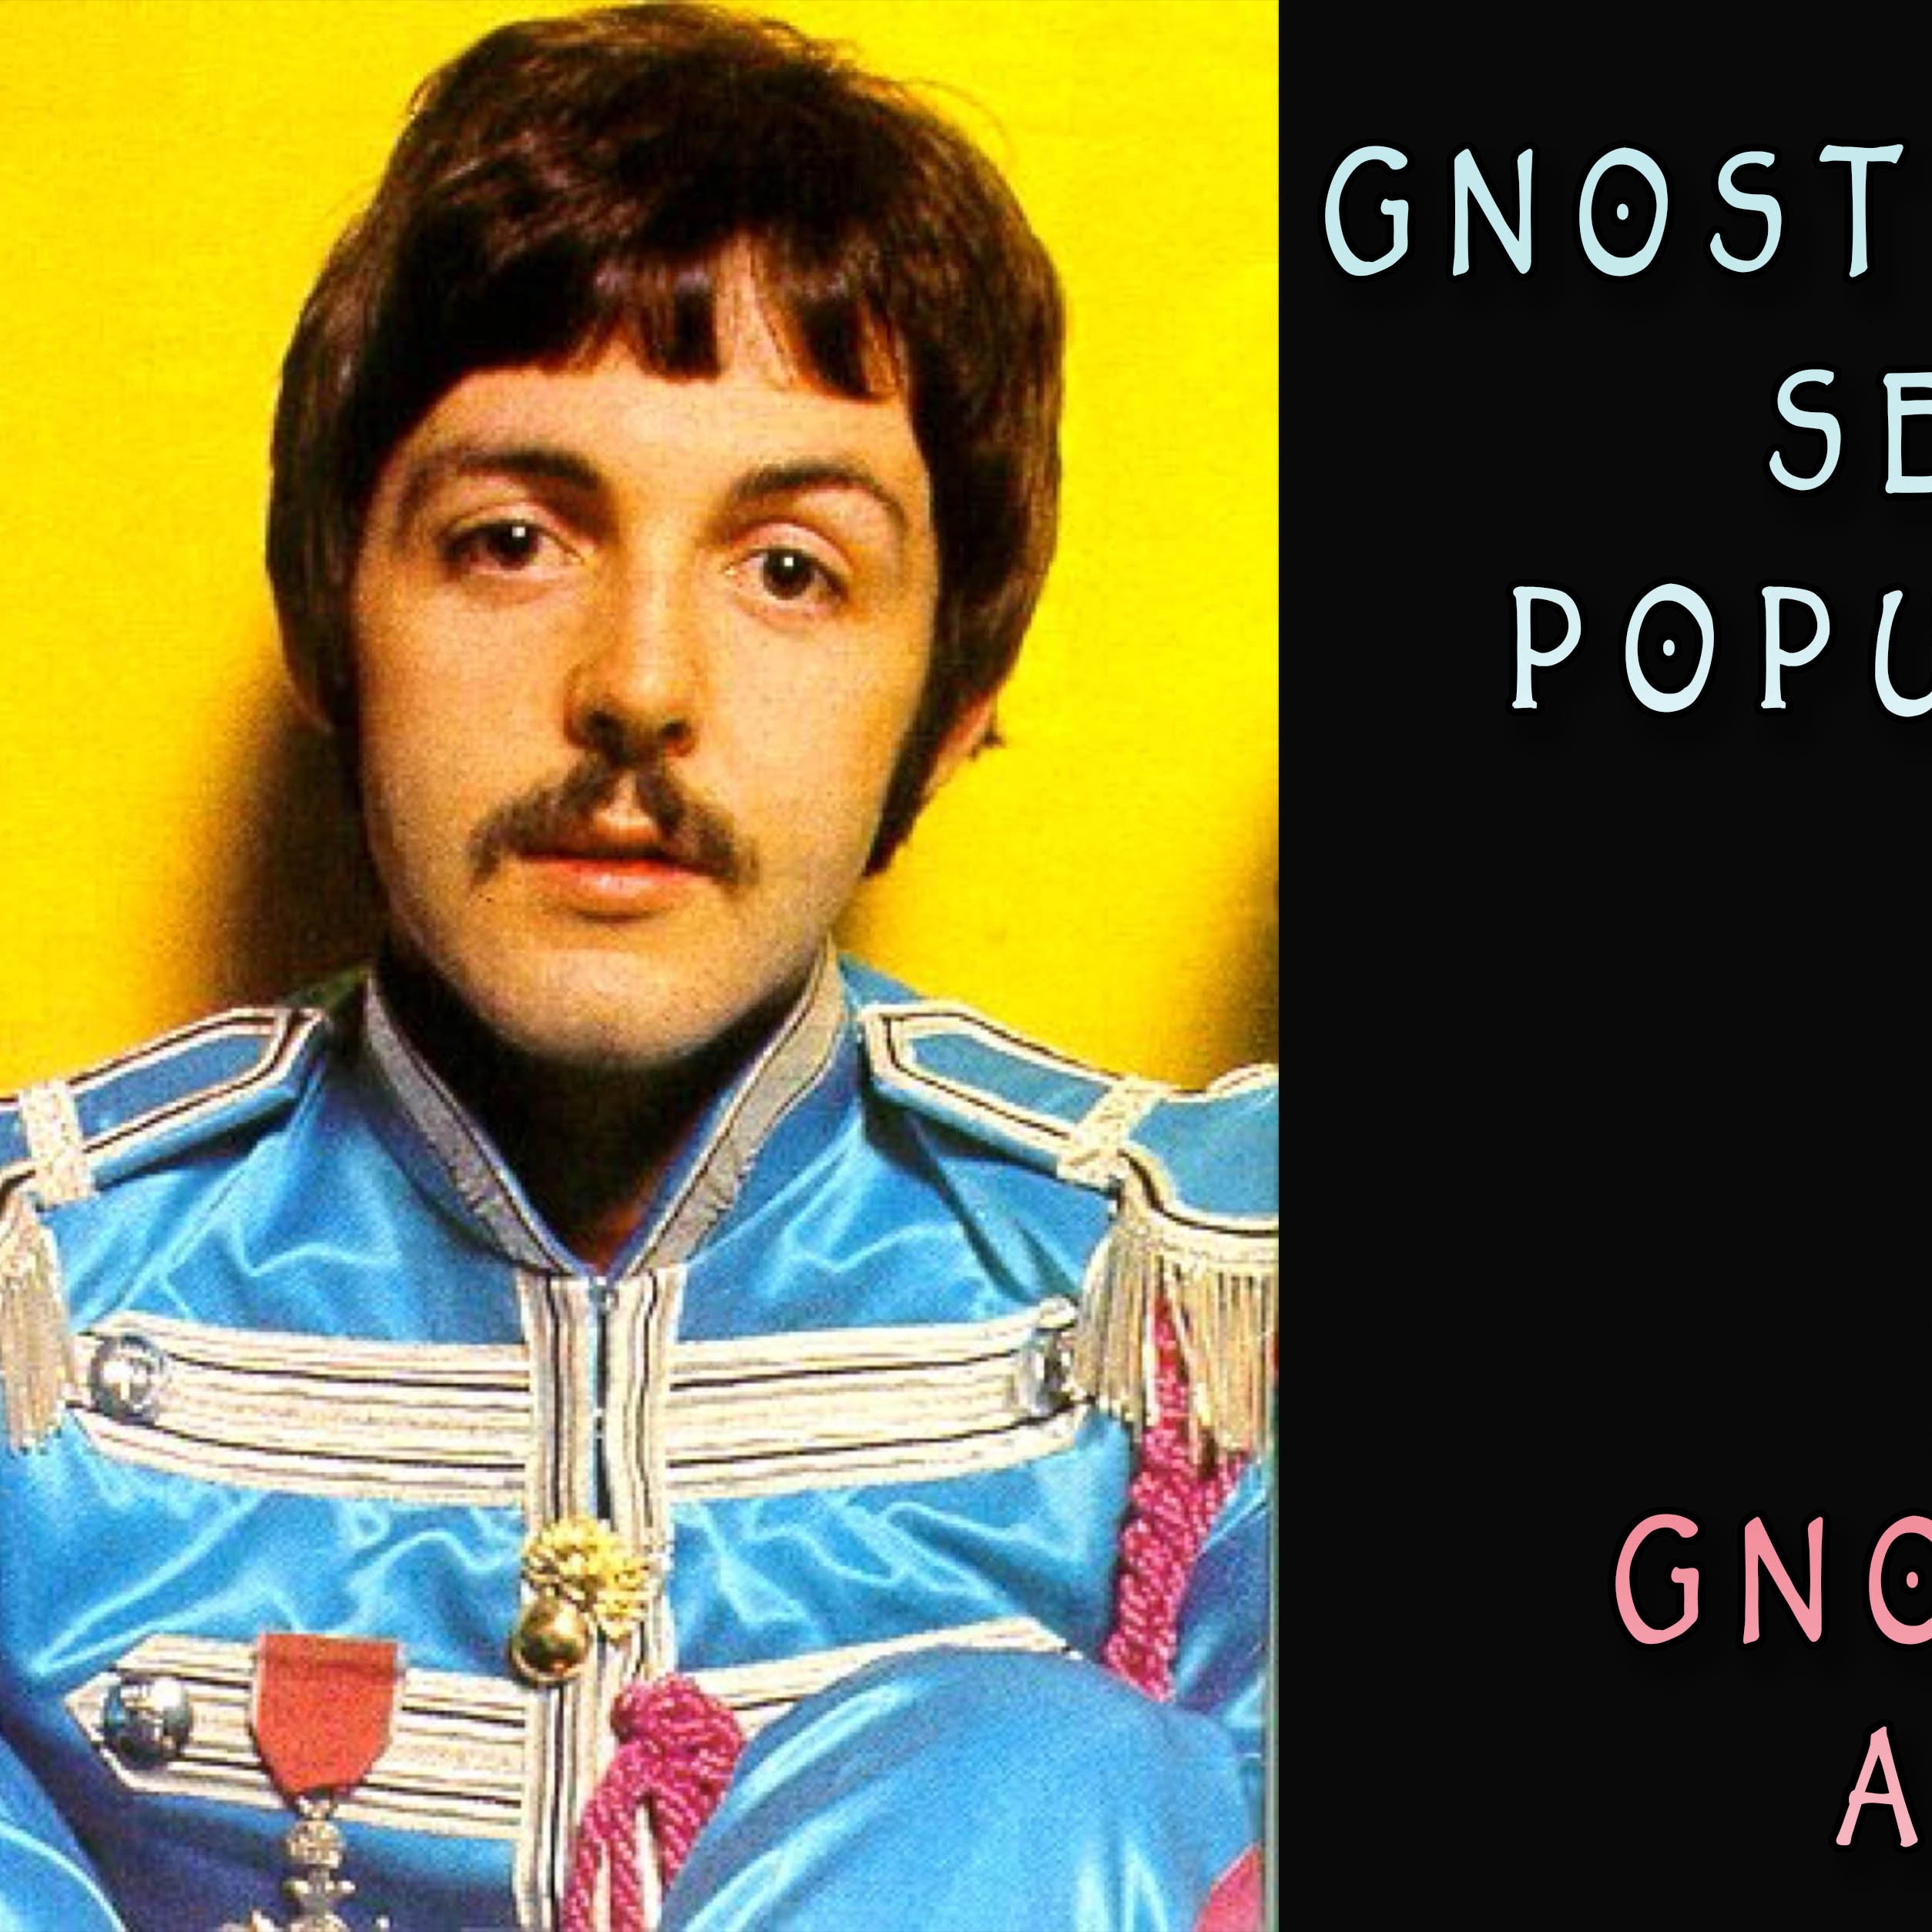 Ian from PMD on Gnostic & Esoteric Secrets In Pop Music 2